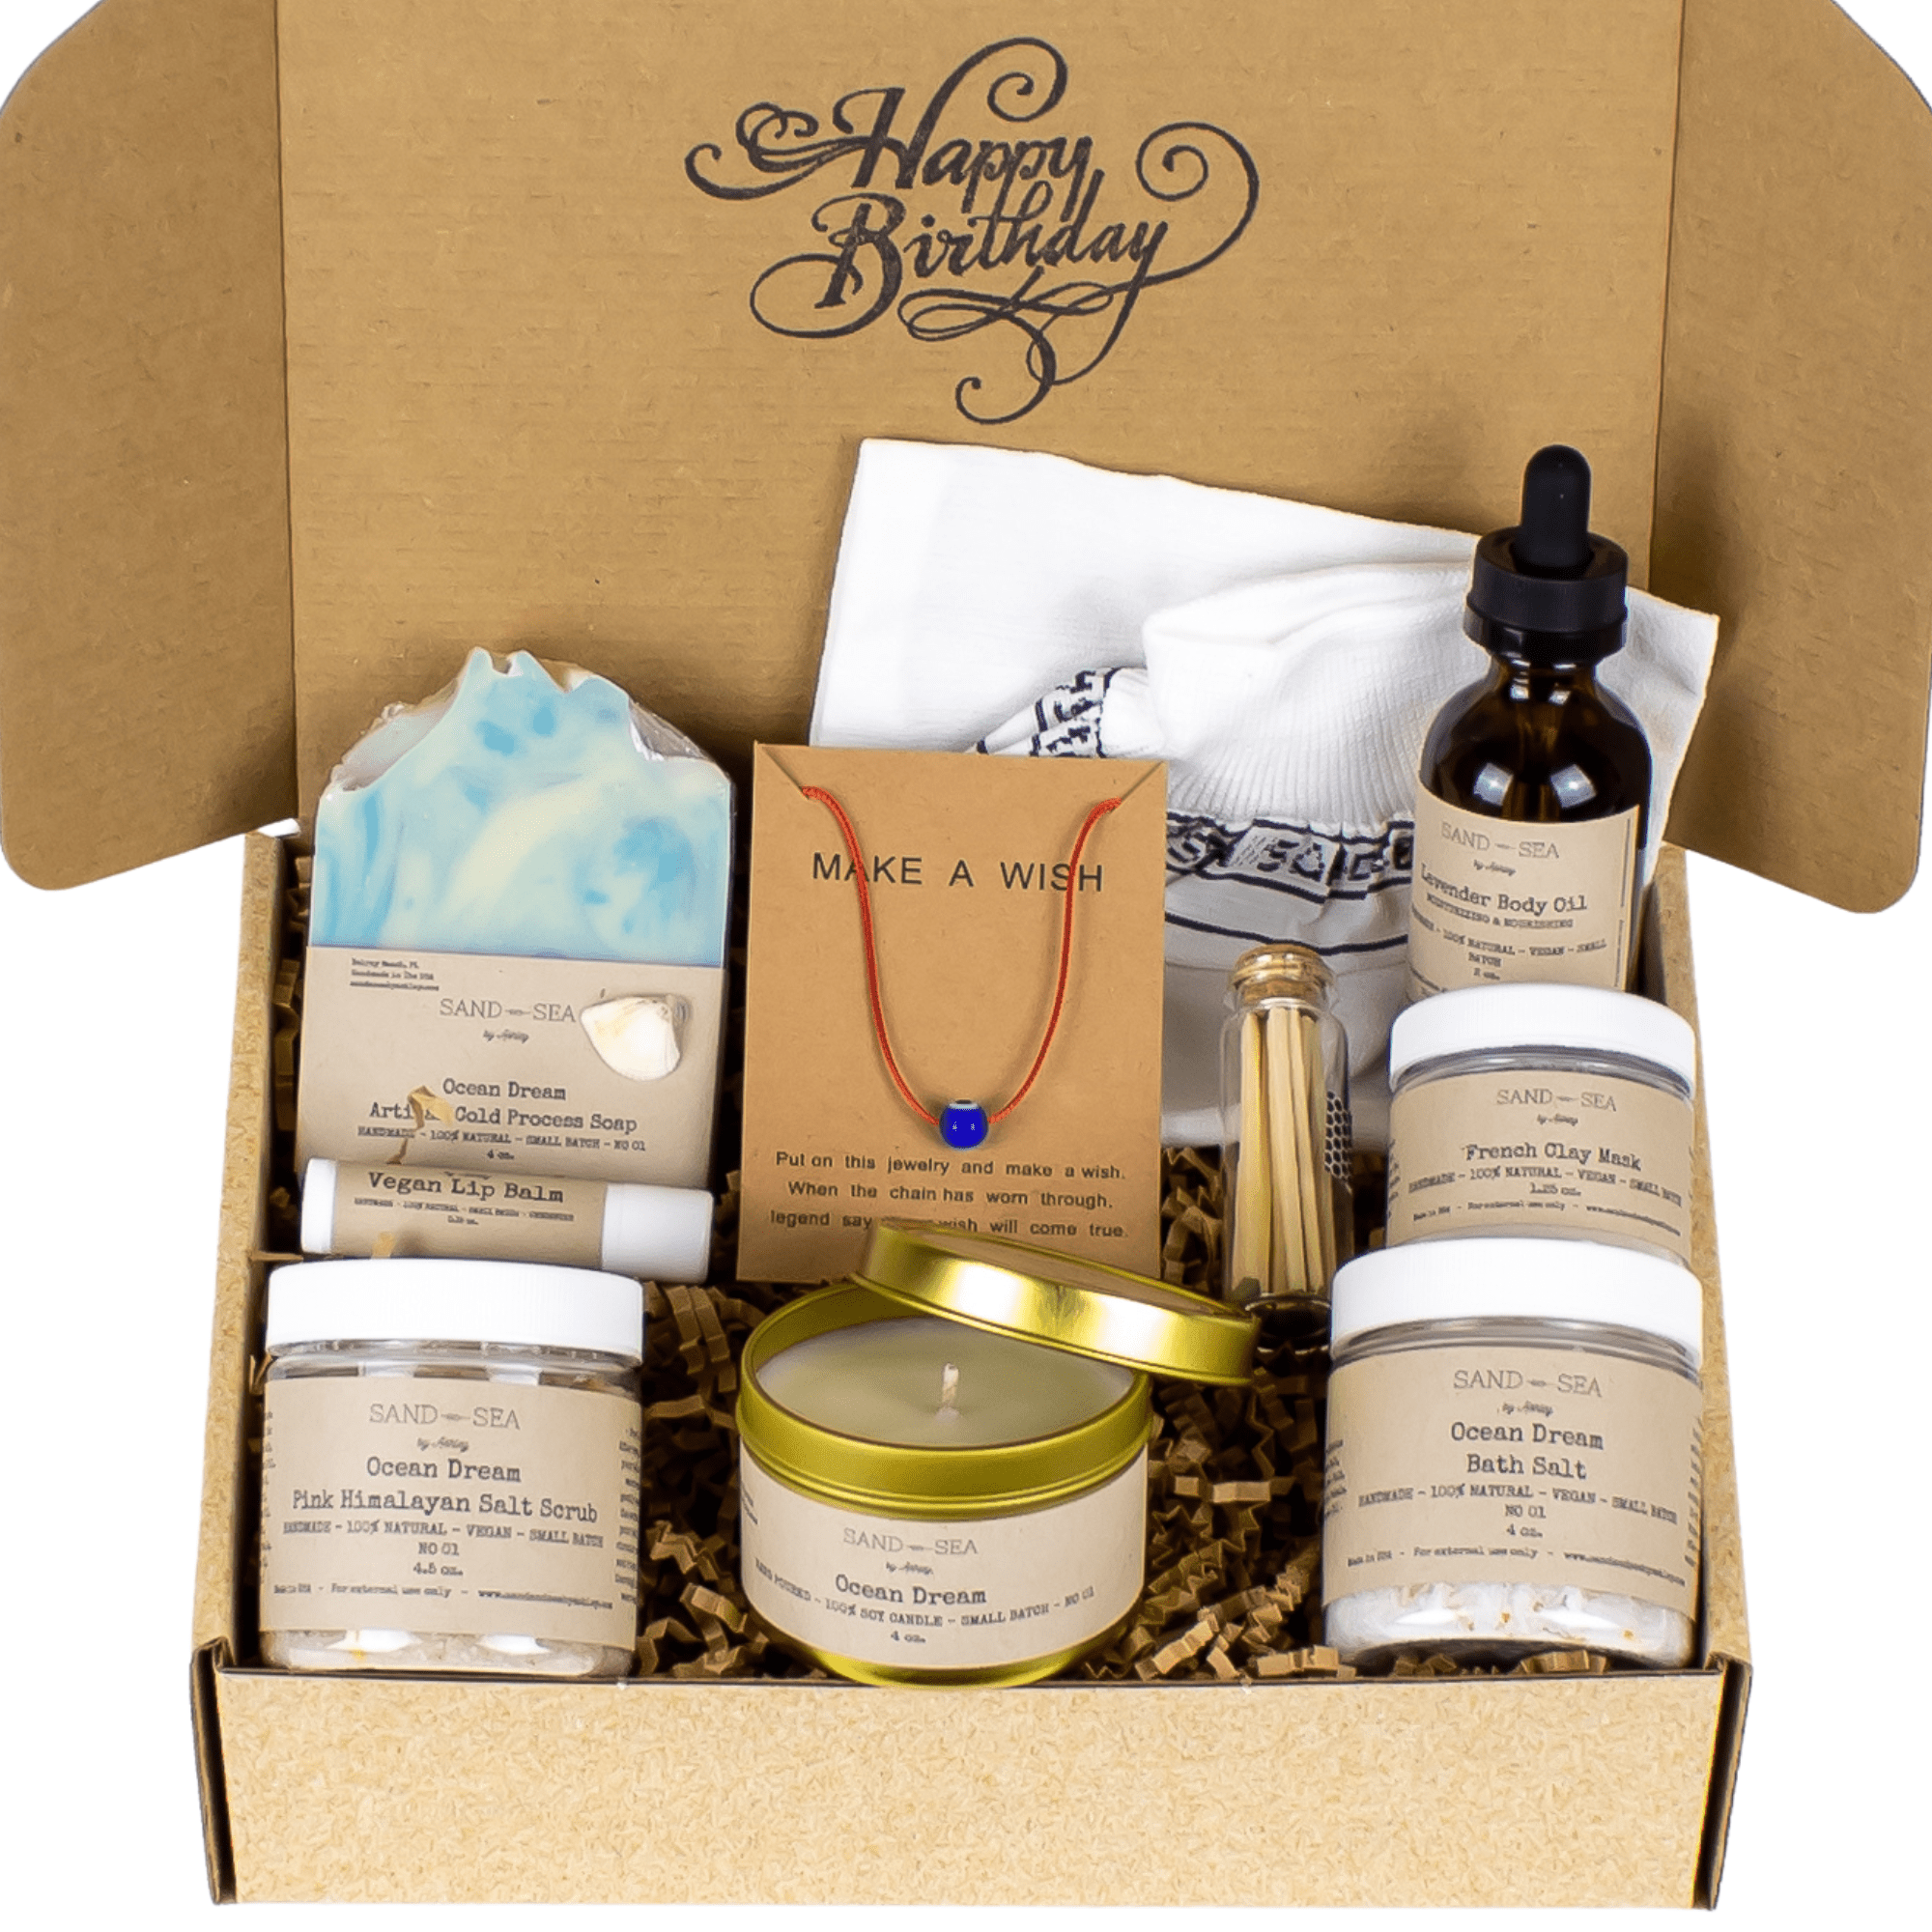 Birthday Gifts for Women, Unique Happy Birthday Relaxing Spa Bath Set Gift Baskets Ideas for Her, Mom, Sister, Friends, Best Pampering Care Gift Box